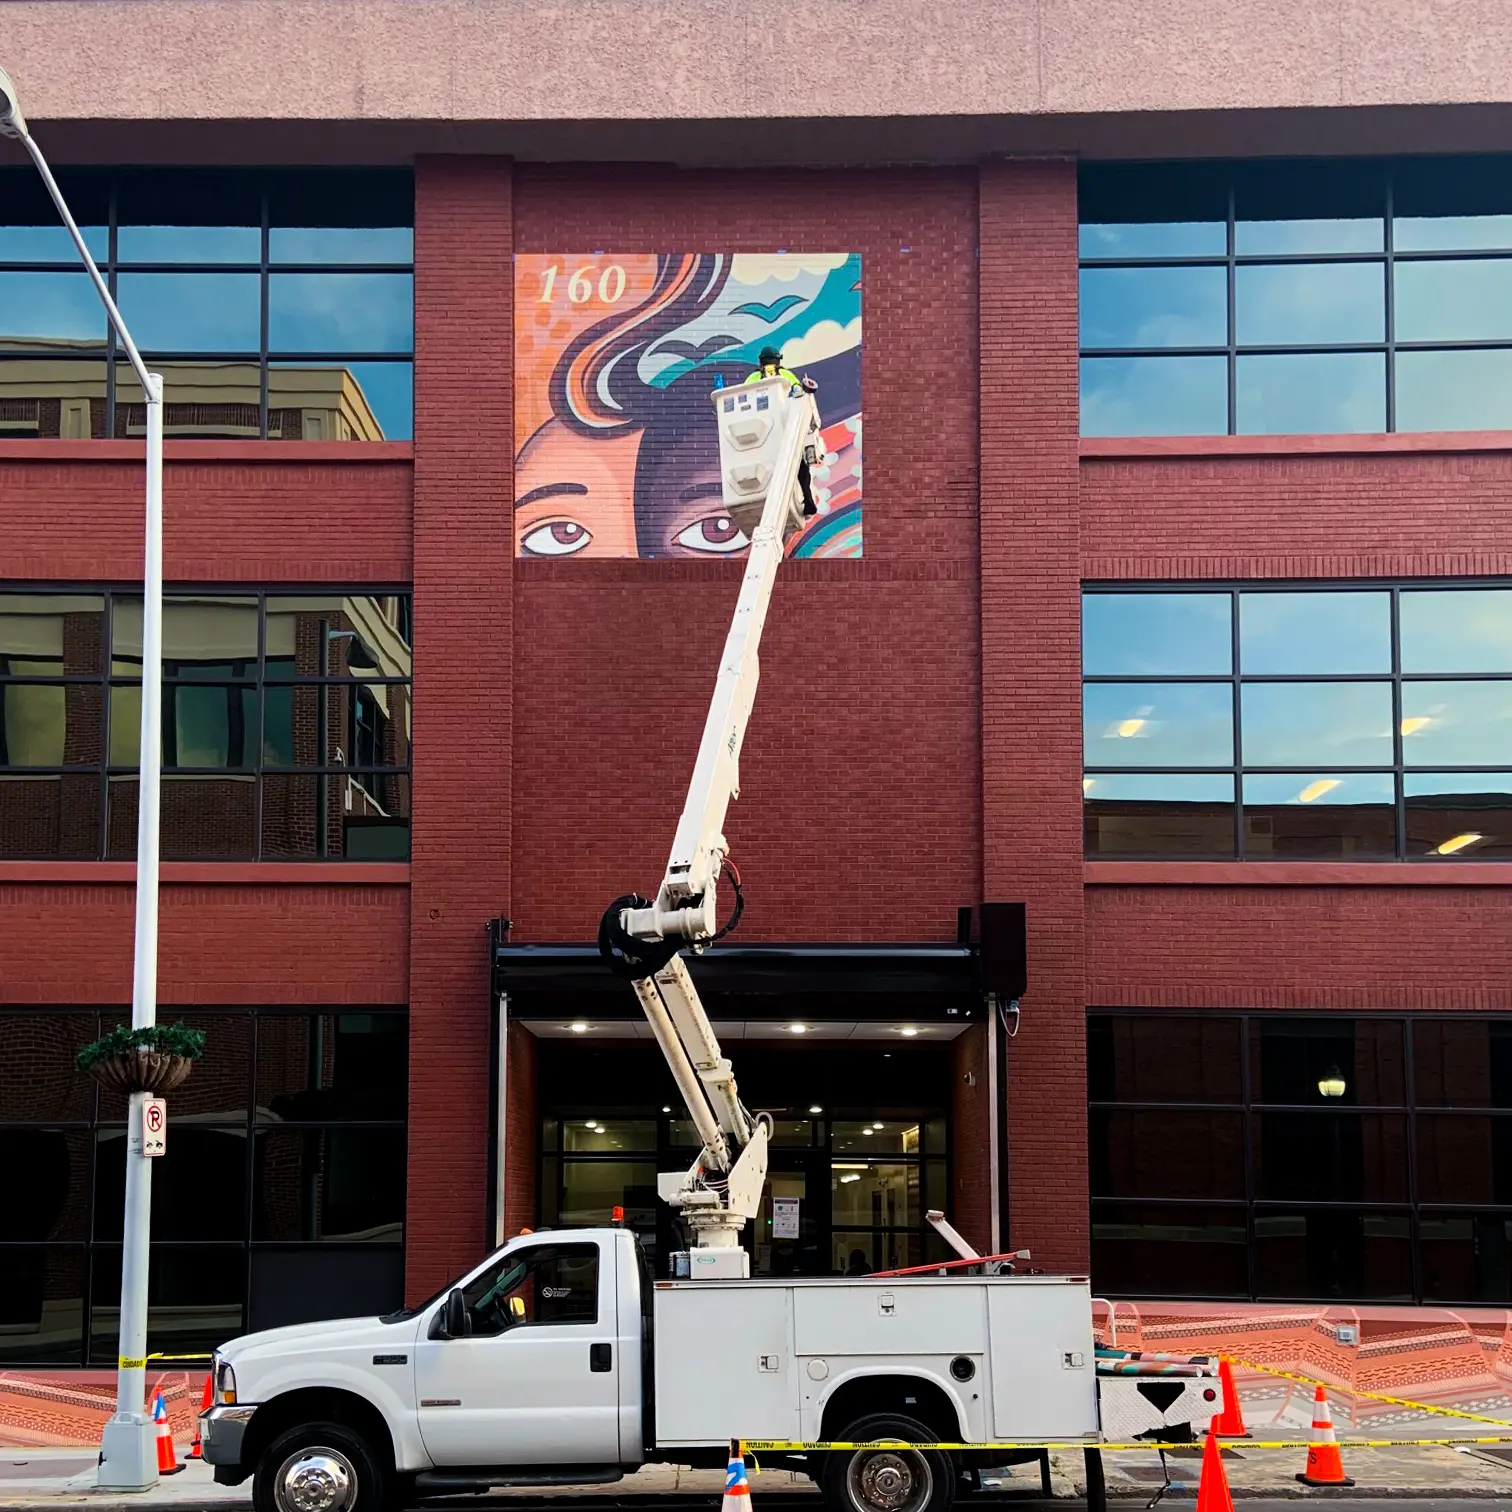 An image of a worker installation a large piece of artwork on the front of a building.